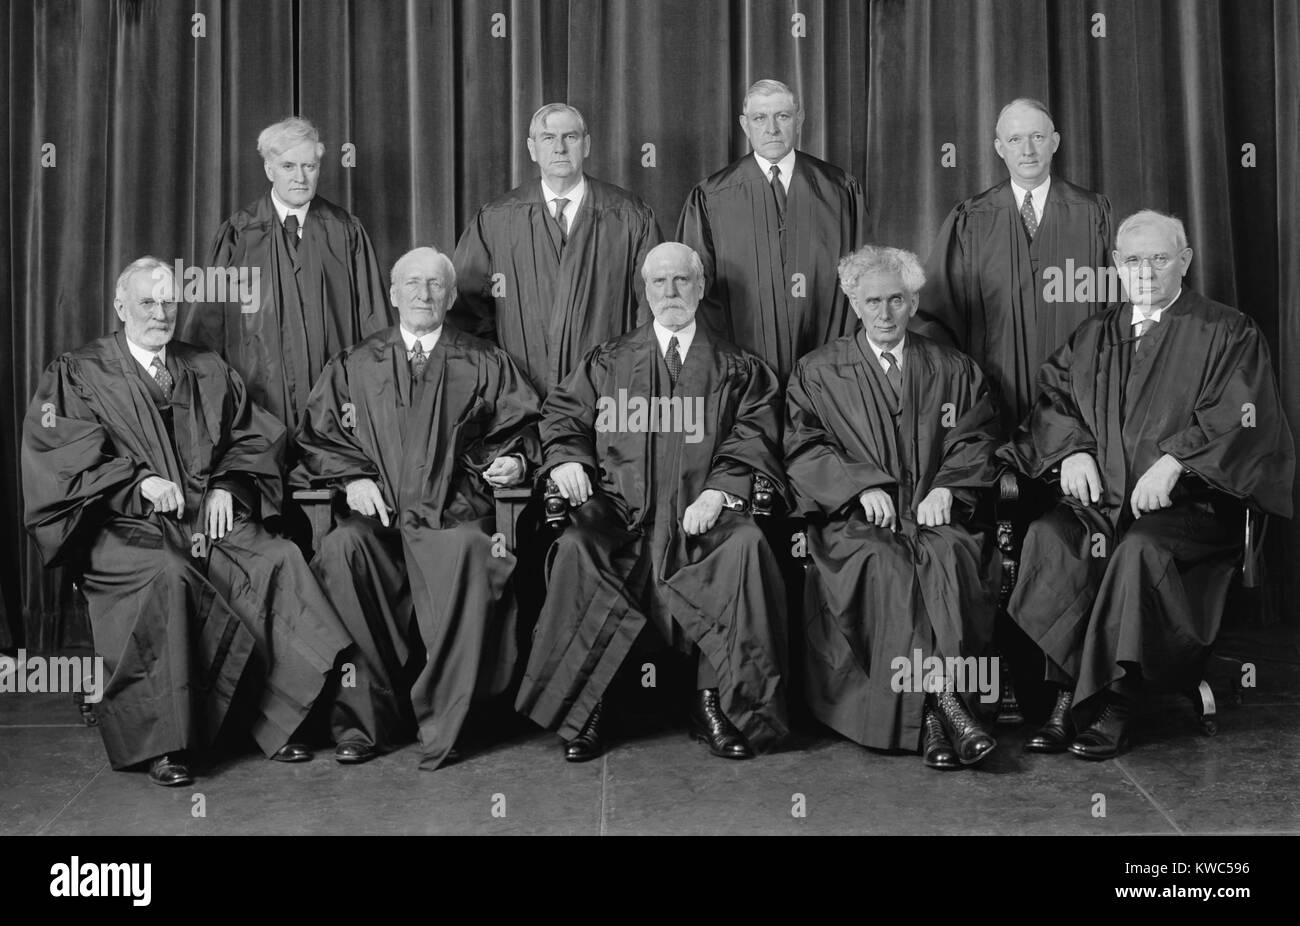 The Justices of the Supreme Court, 1937-38. Sitting, from left to right, Justices George Sutherland, James McReynolds, Chief Justice Charles Evans Hughes, Justices Louis Brandeis and Pierce Butler. Standing, left to right, Justices Benjamin Cardozo, Harlan Stone, Owen Roberts, and Hugo Black. (BSLOC 2015 14 15) Stock Photo